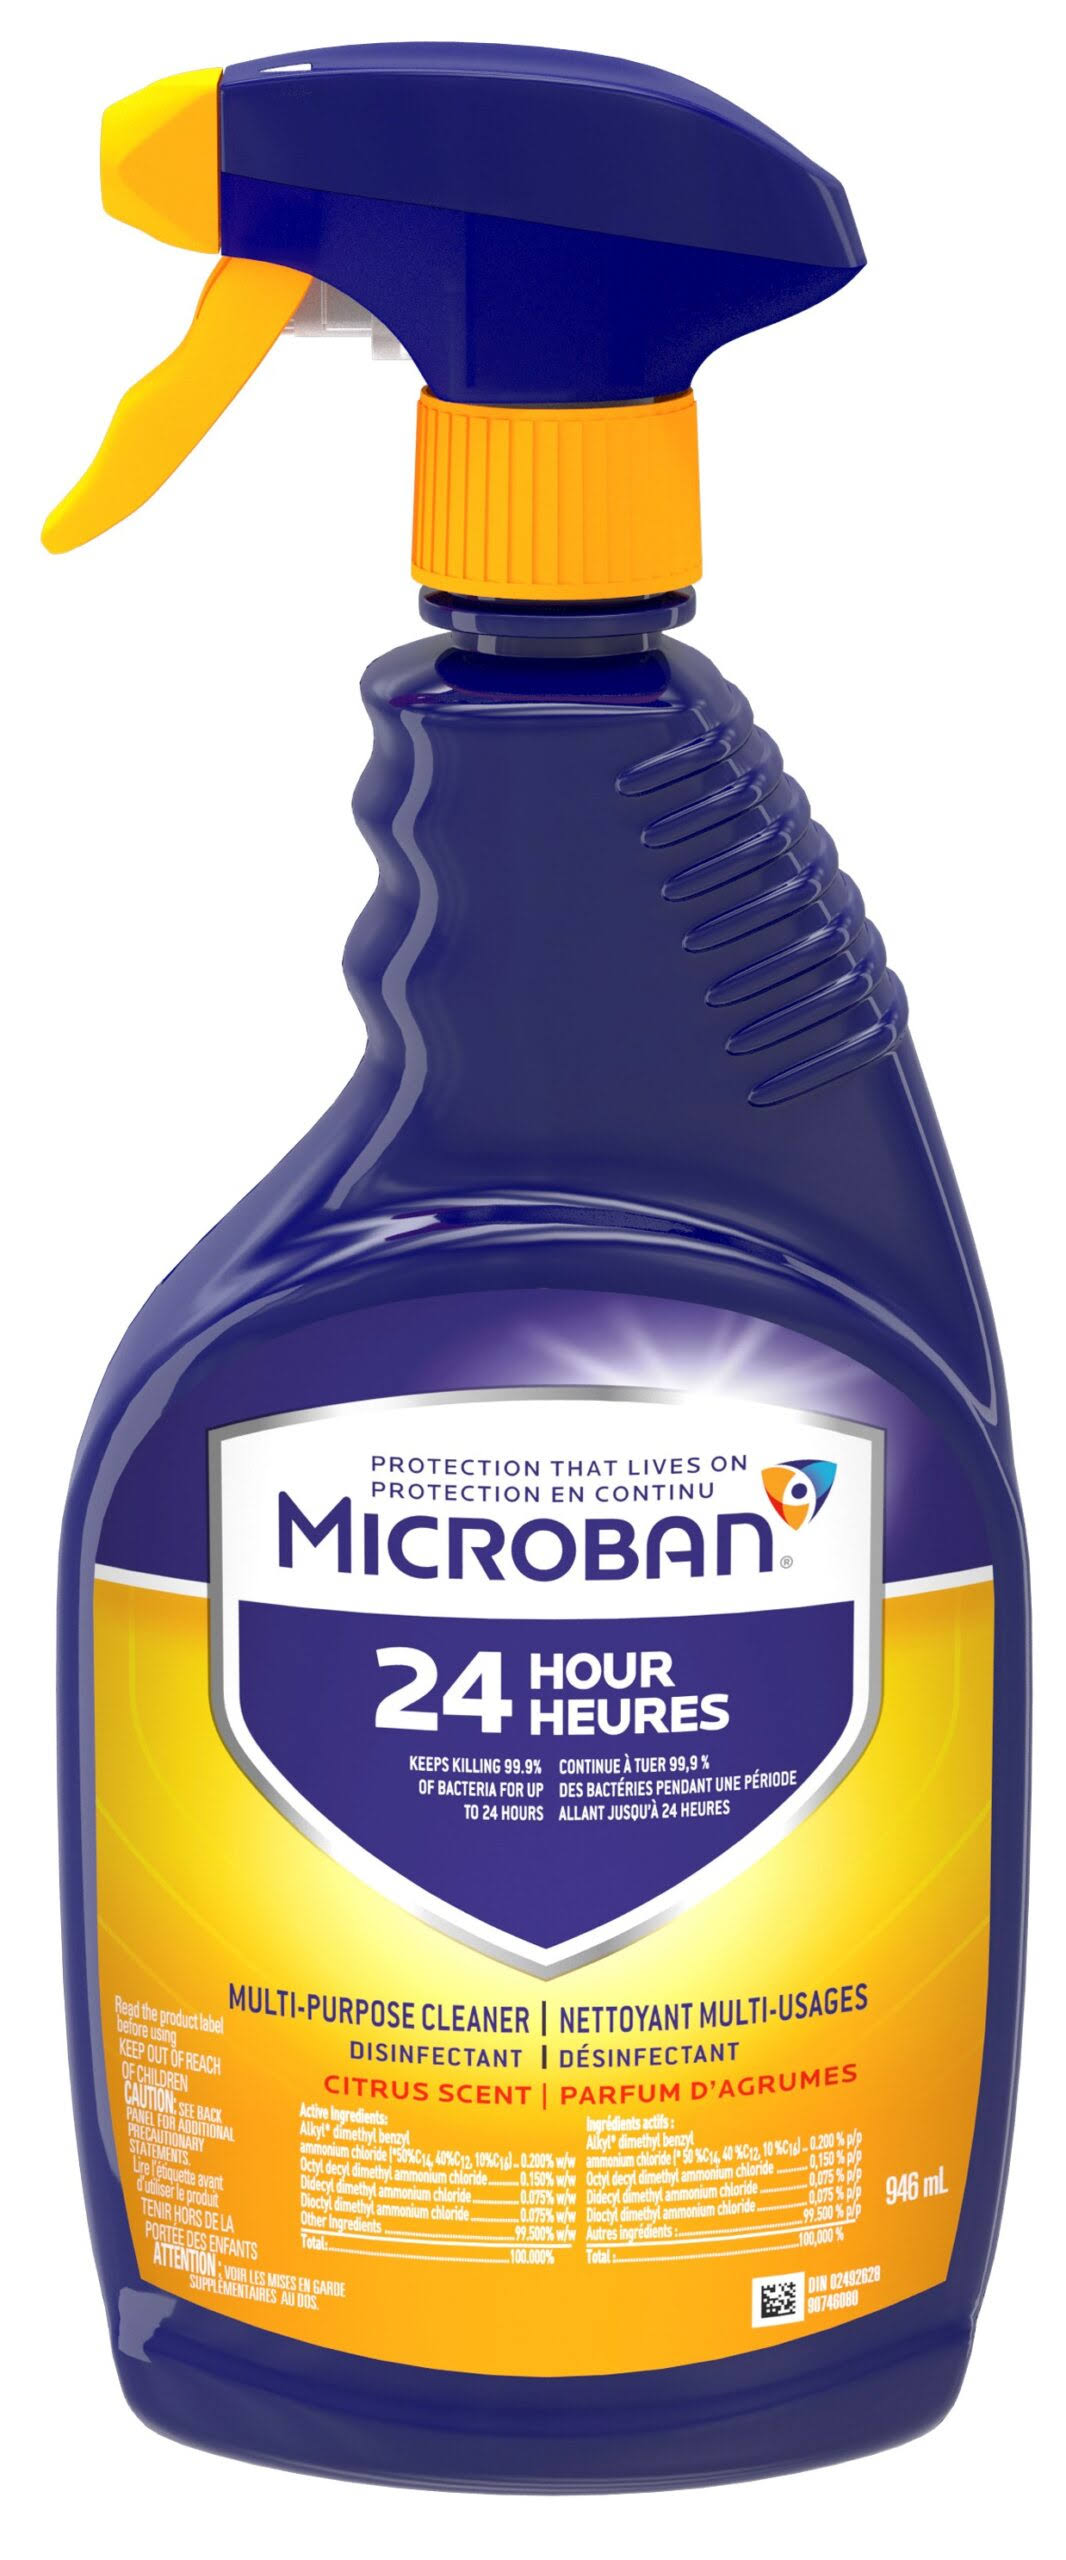 Microban 24 Hour Multi-Purpose Cleaner And Disinfectant Spray, Citrus Scent